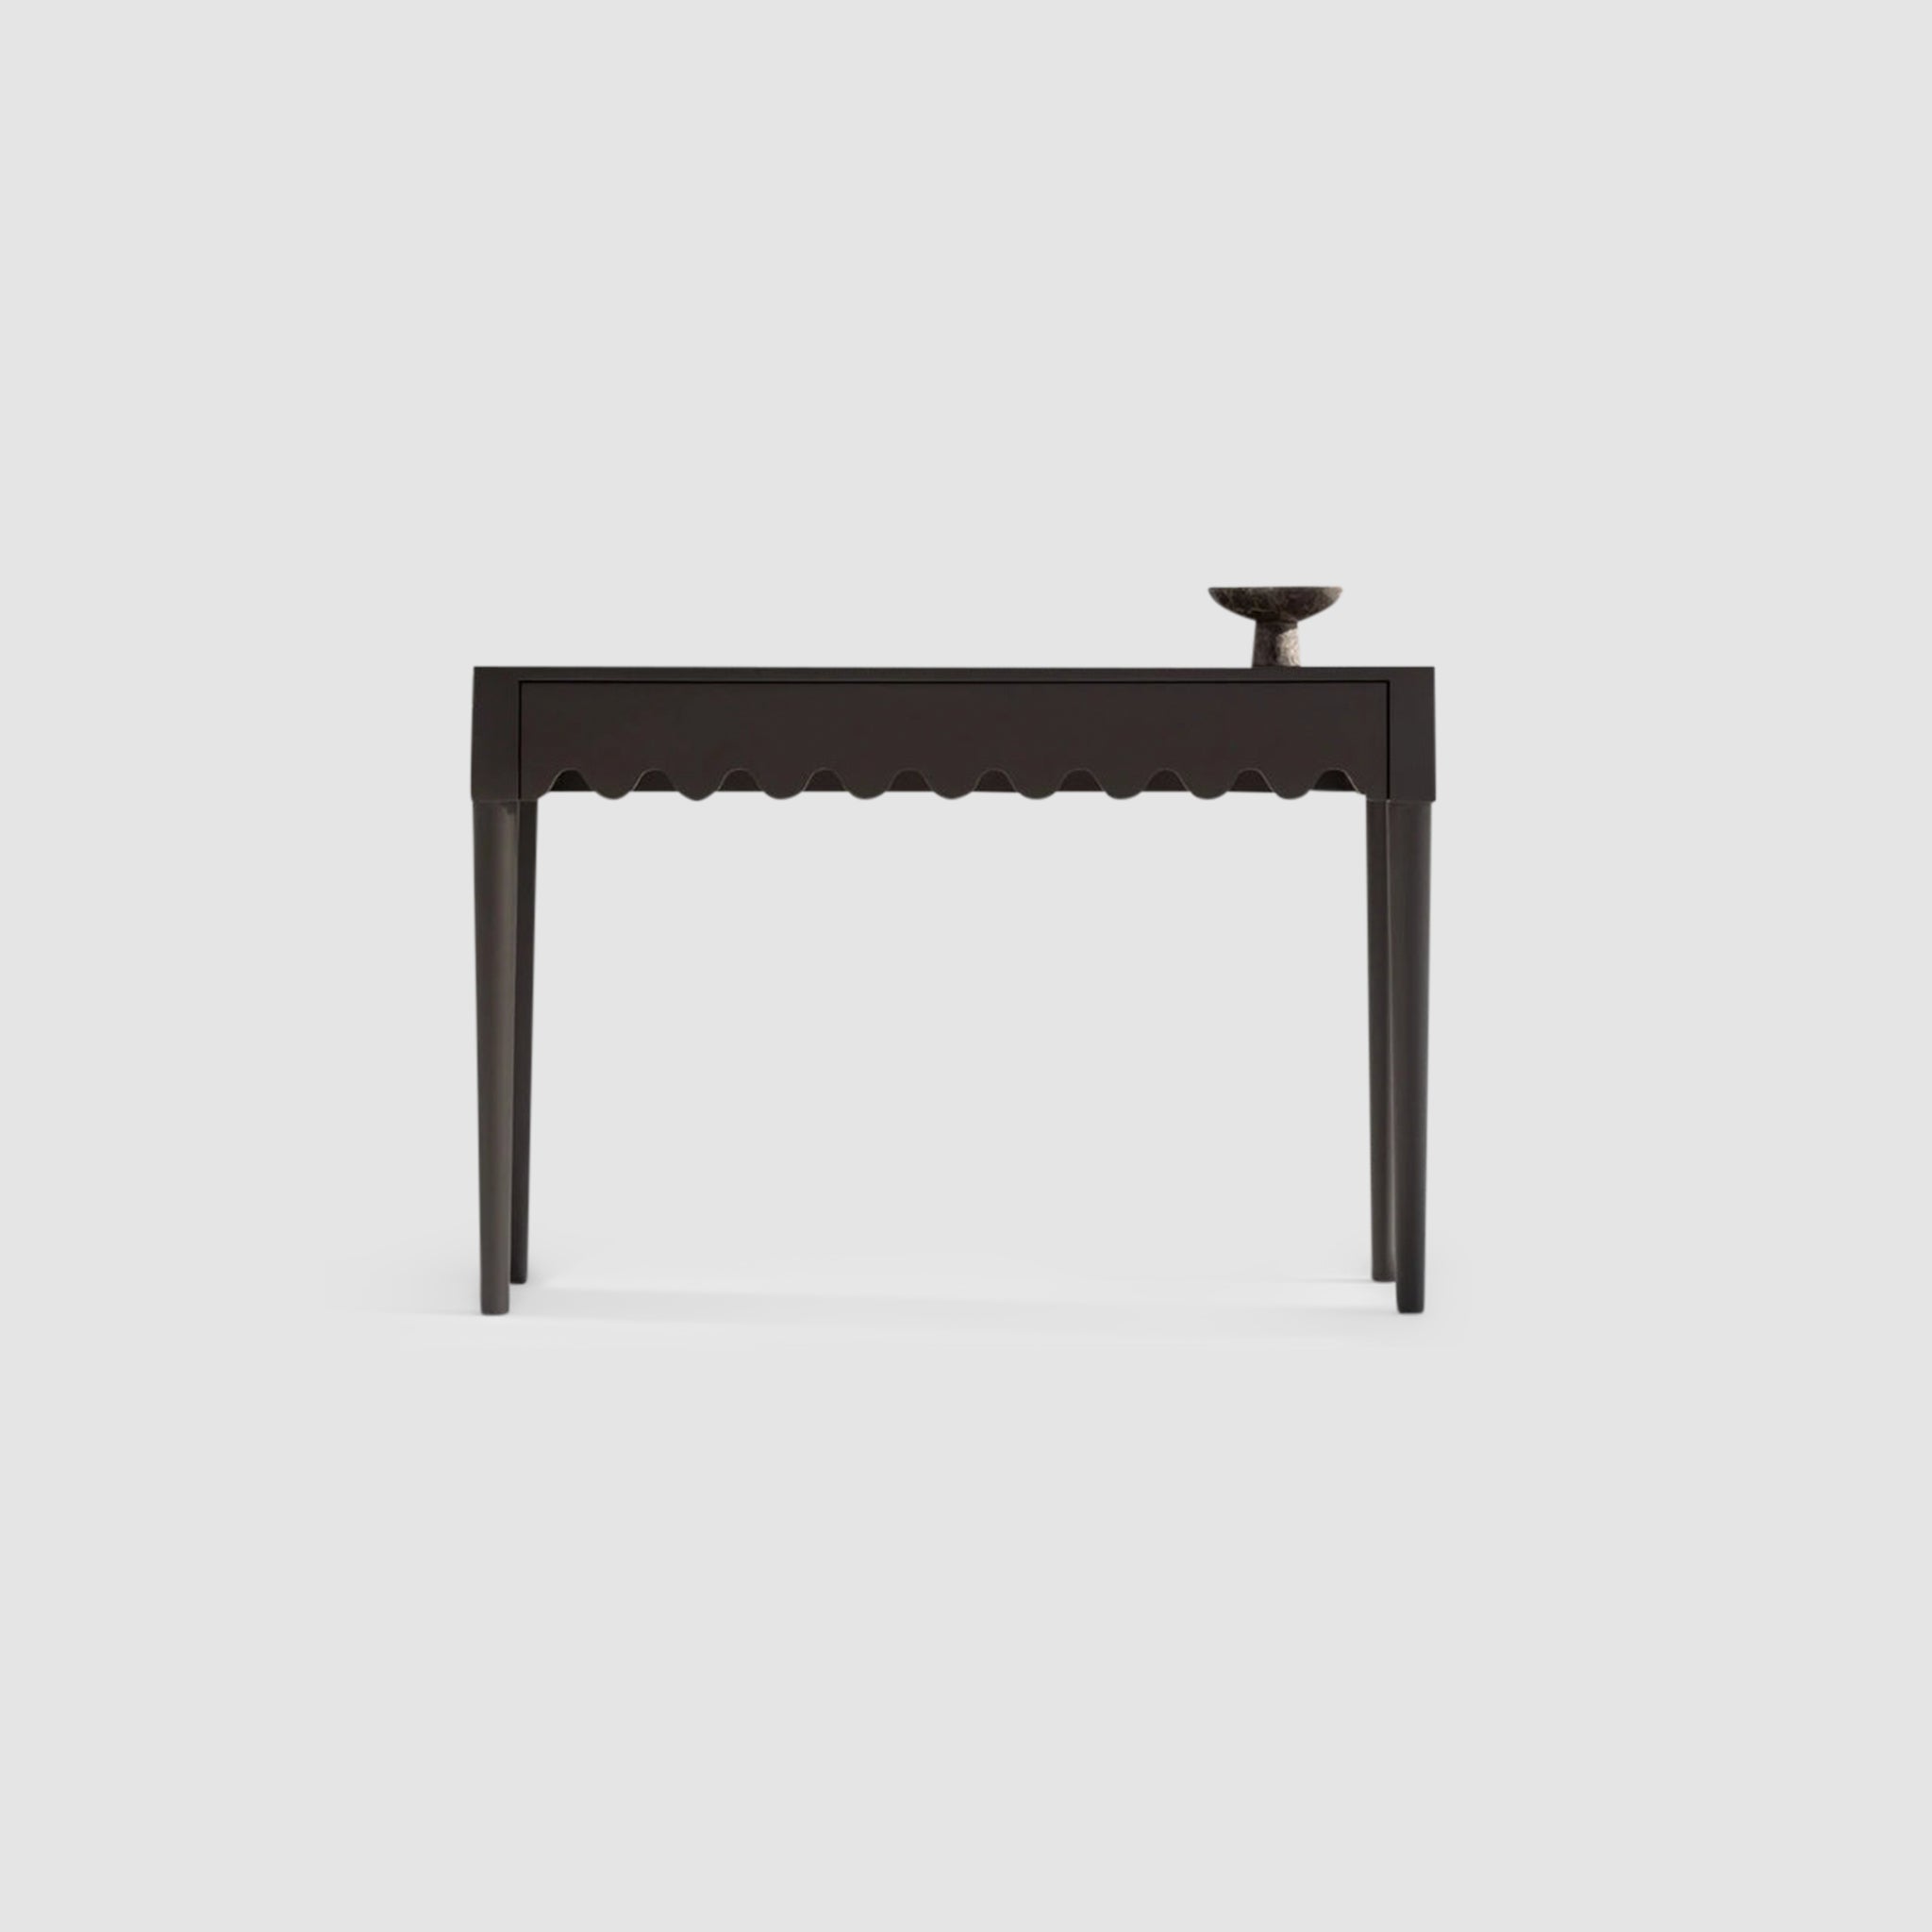 "The Dolores Console with a sleek modern design and a curvy bottom drawer."